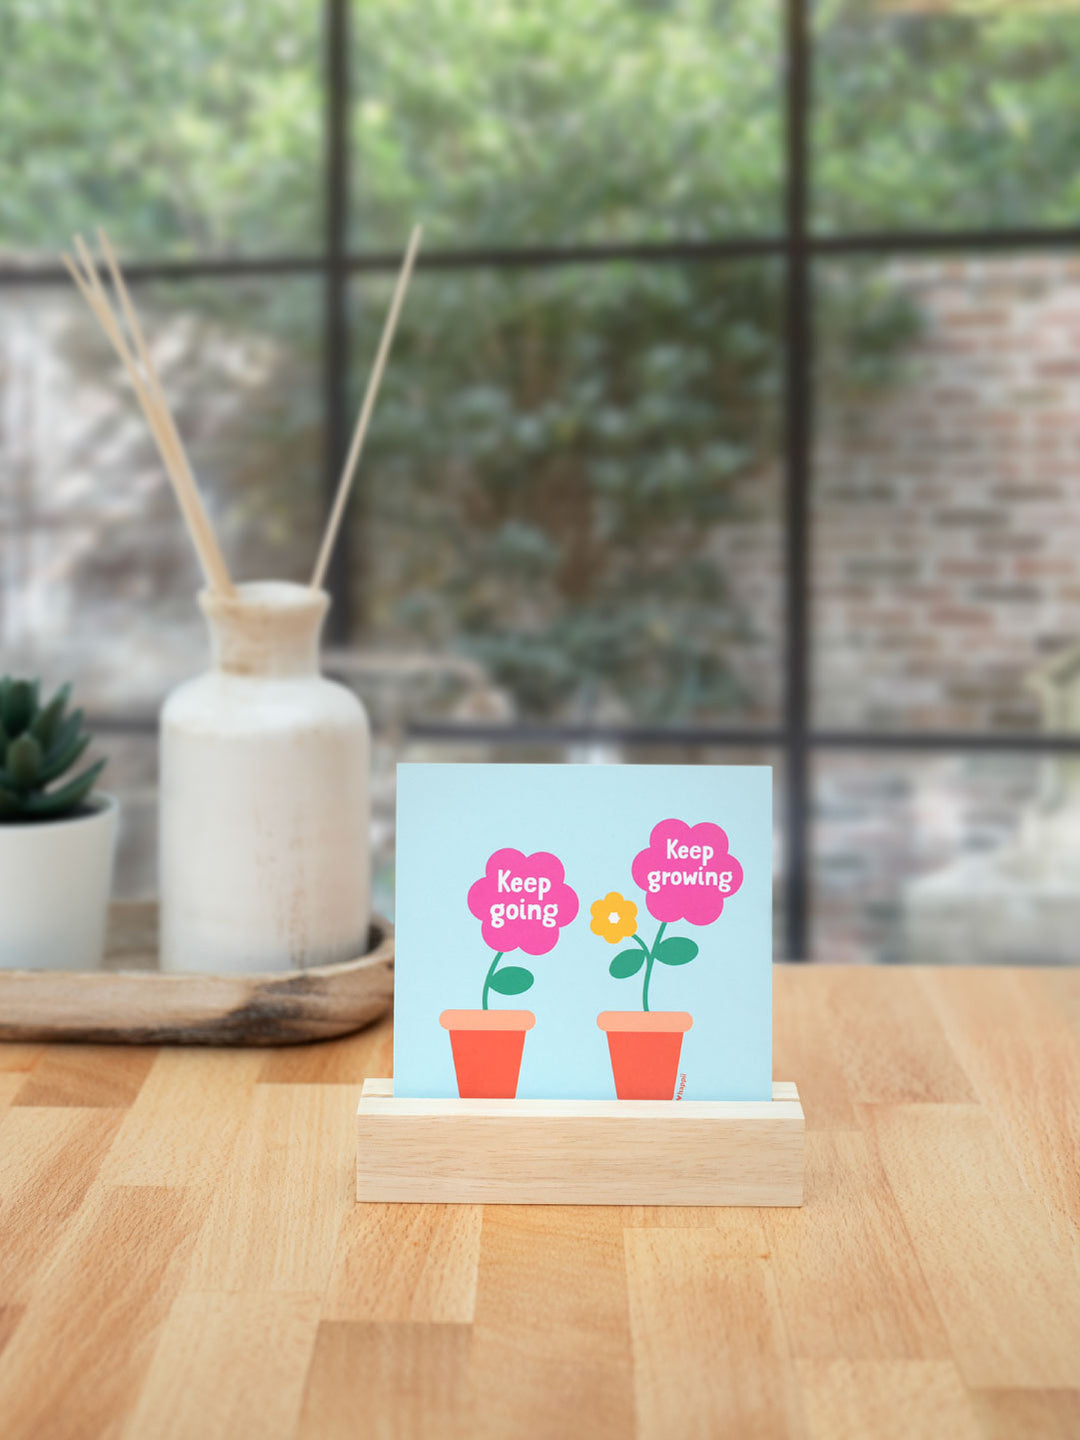 Keep Going Keep Growing | 10 Affirmation Cards